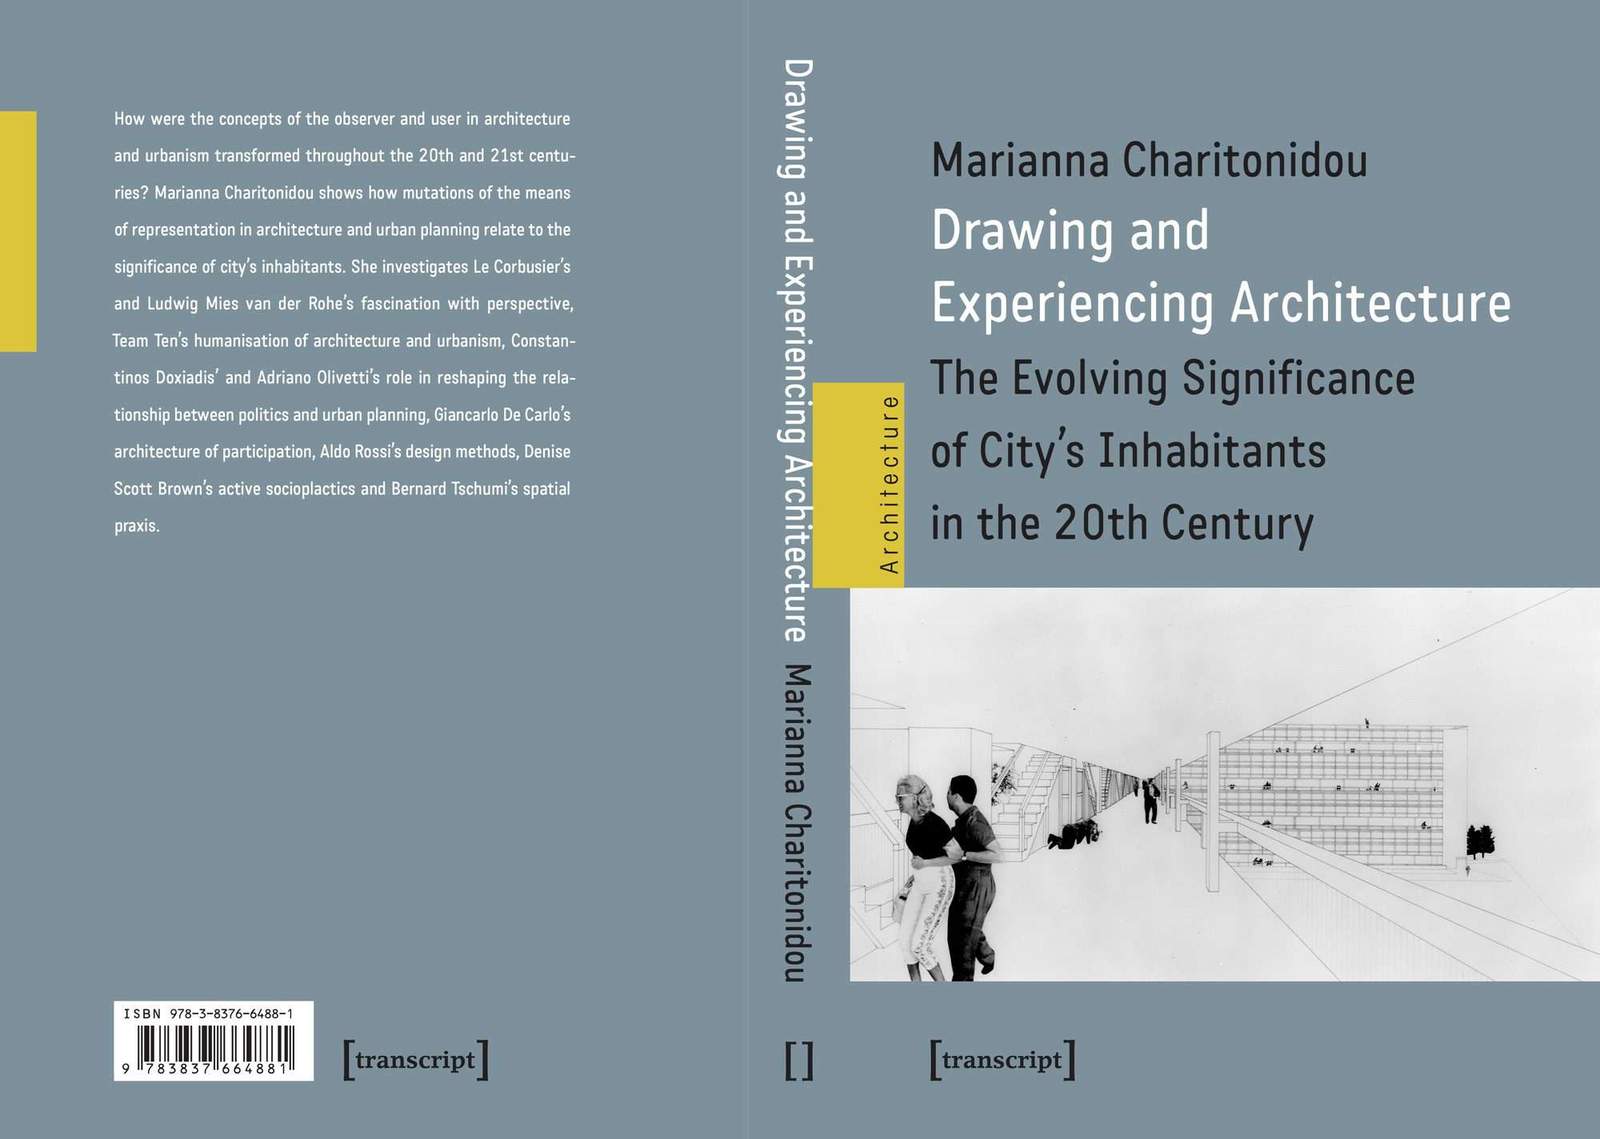 Book launch of Drawing and Experiencing Architecture by Dr. Ing. Marianna Charitonidou